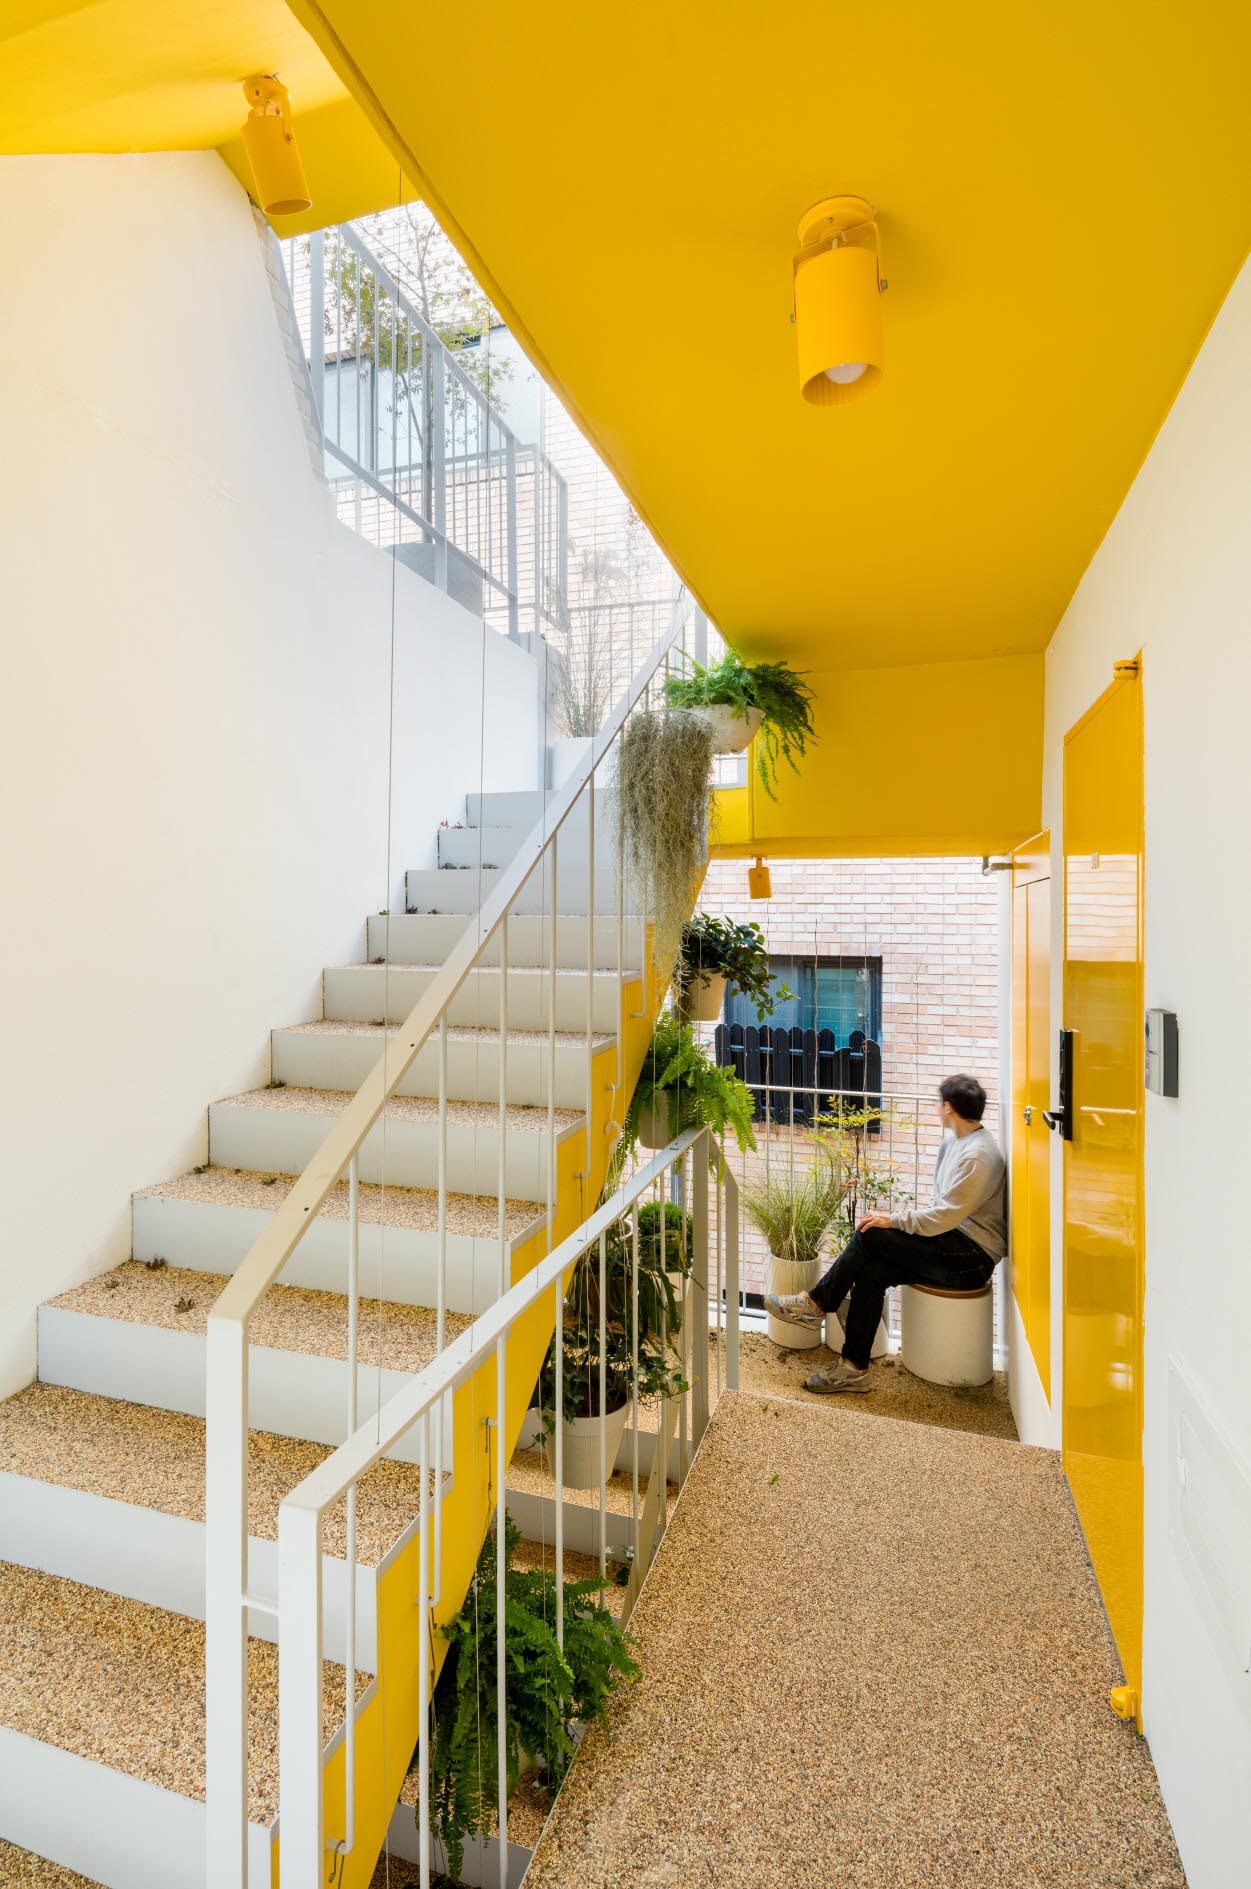 A modern apartment building that has yellow accents in a stairwell.